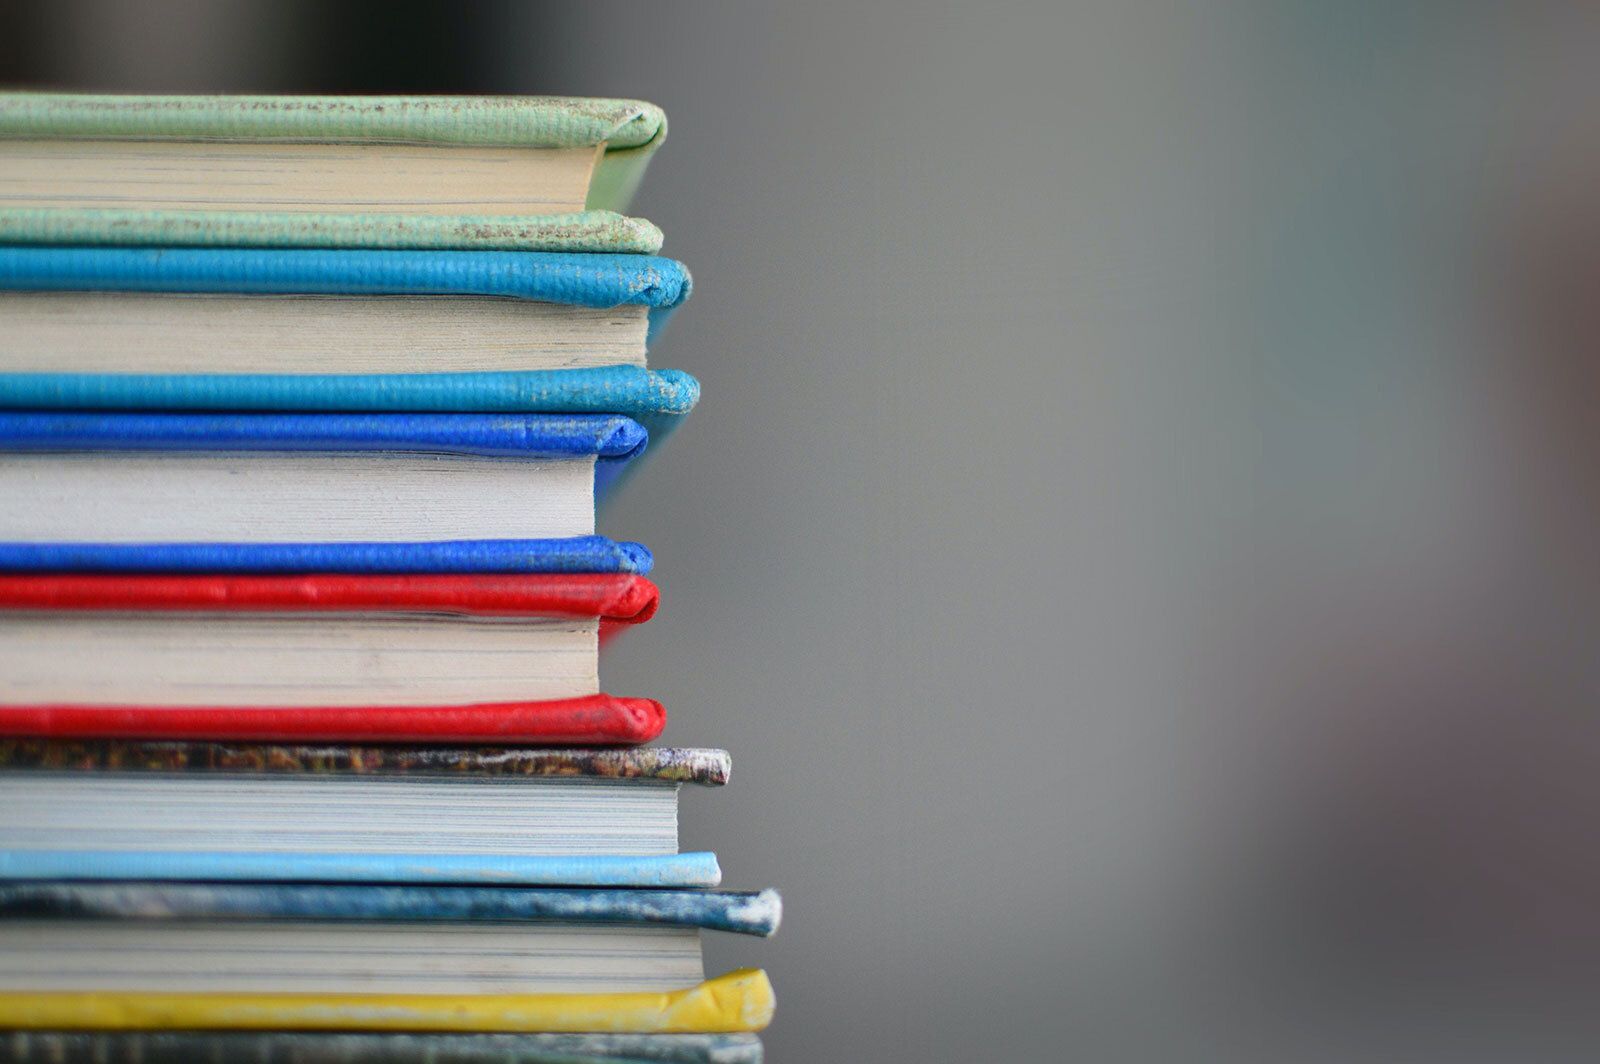 Stacks of colorful books.